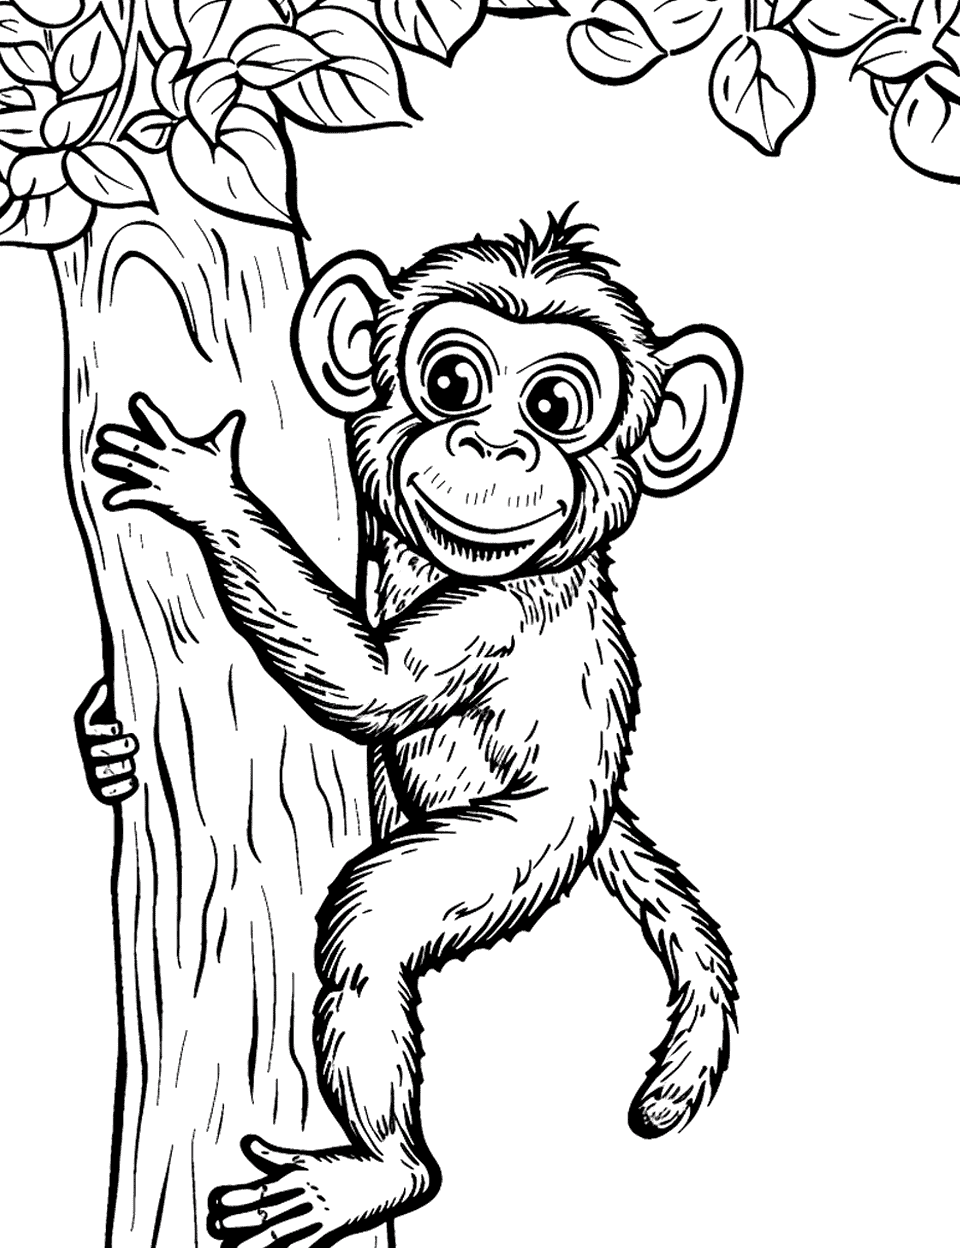 Monkey Climbing a Tree Coloring Page - A straightforward scene of a monkey climbing up a tree trunk.